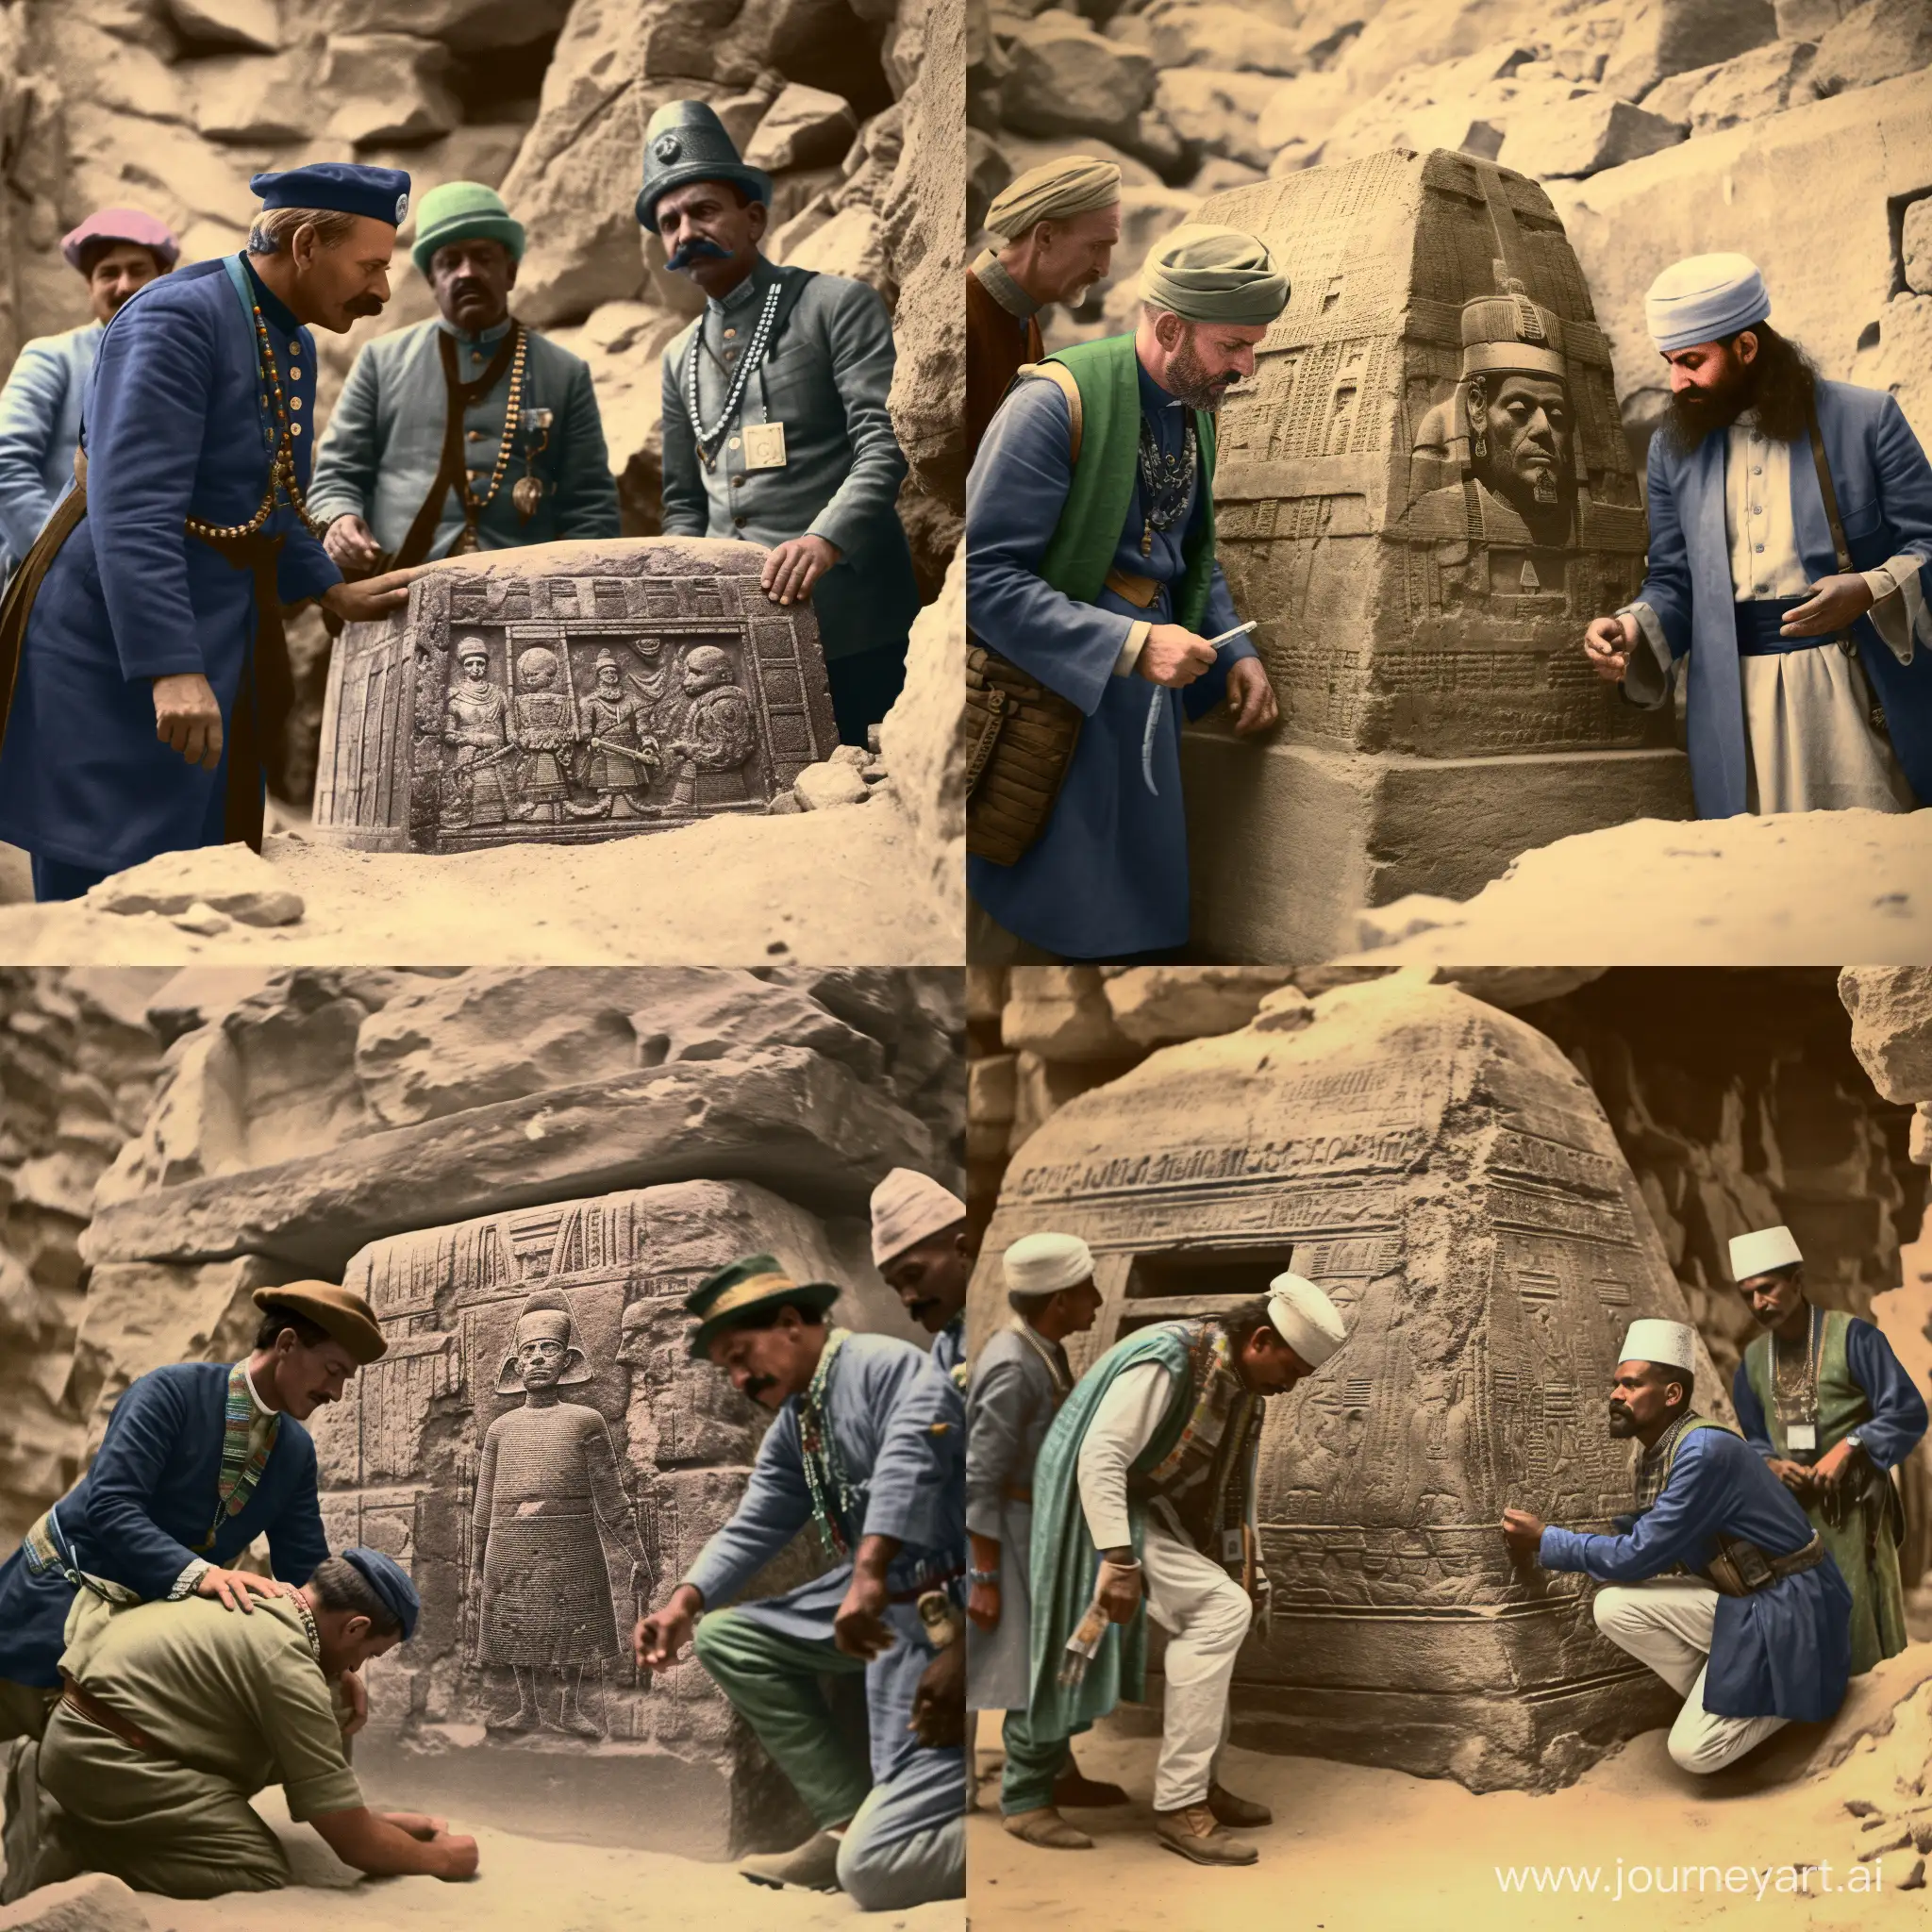  An old realistic 1890s colorized photo of explorers discovering the sarcophagus of ancient egyptian mummy. mummy and sarcophagus. in ancient dusty tomb. hieroglyphics on walls. realistic. 3 explorers. 1 explorer is a tall man wearing a khaki british desert uniform and a pith helmet. 1 explorer is an old man with a white beard in a pith helmet with spectacles. 1 explorer is an egyptian man in light clothes wearing a fez.- v6